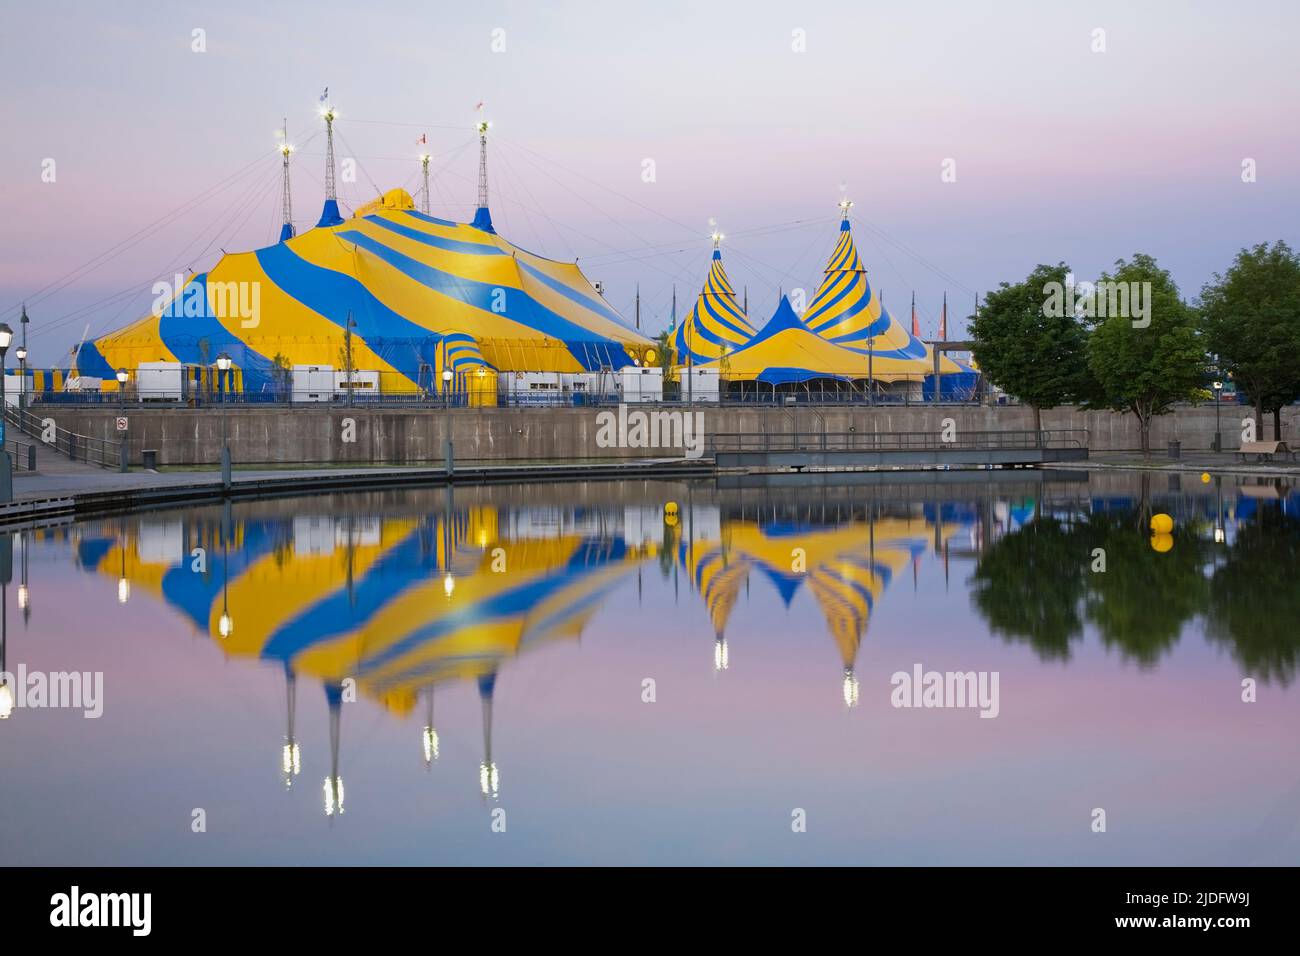 Cirque du Soleil Big Top tent installations reflected in the Bonsecours Bassin at dawn, Old Port of Montreal, Quebec, Canada. Stock Photo